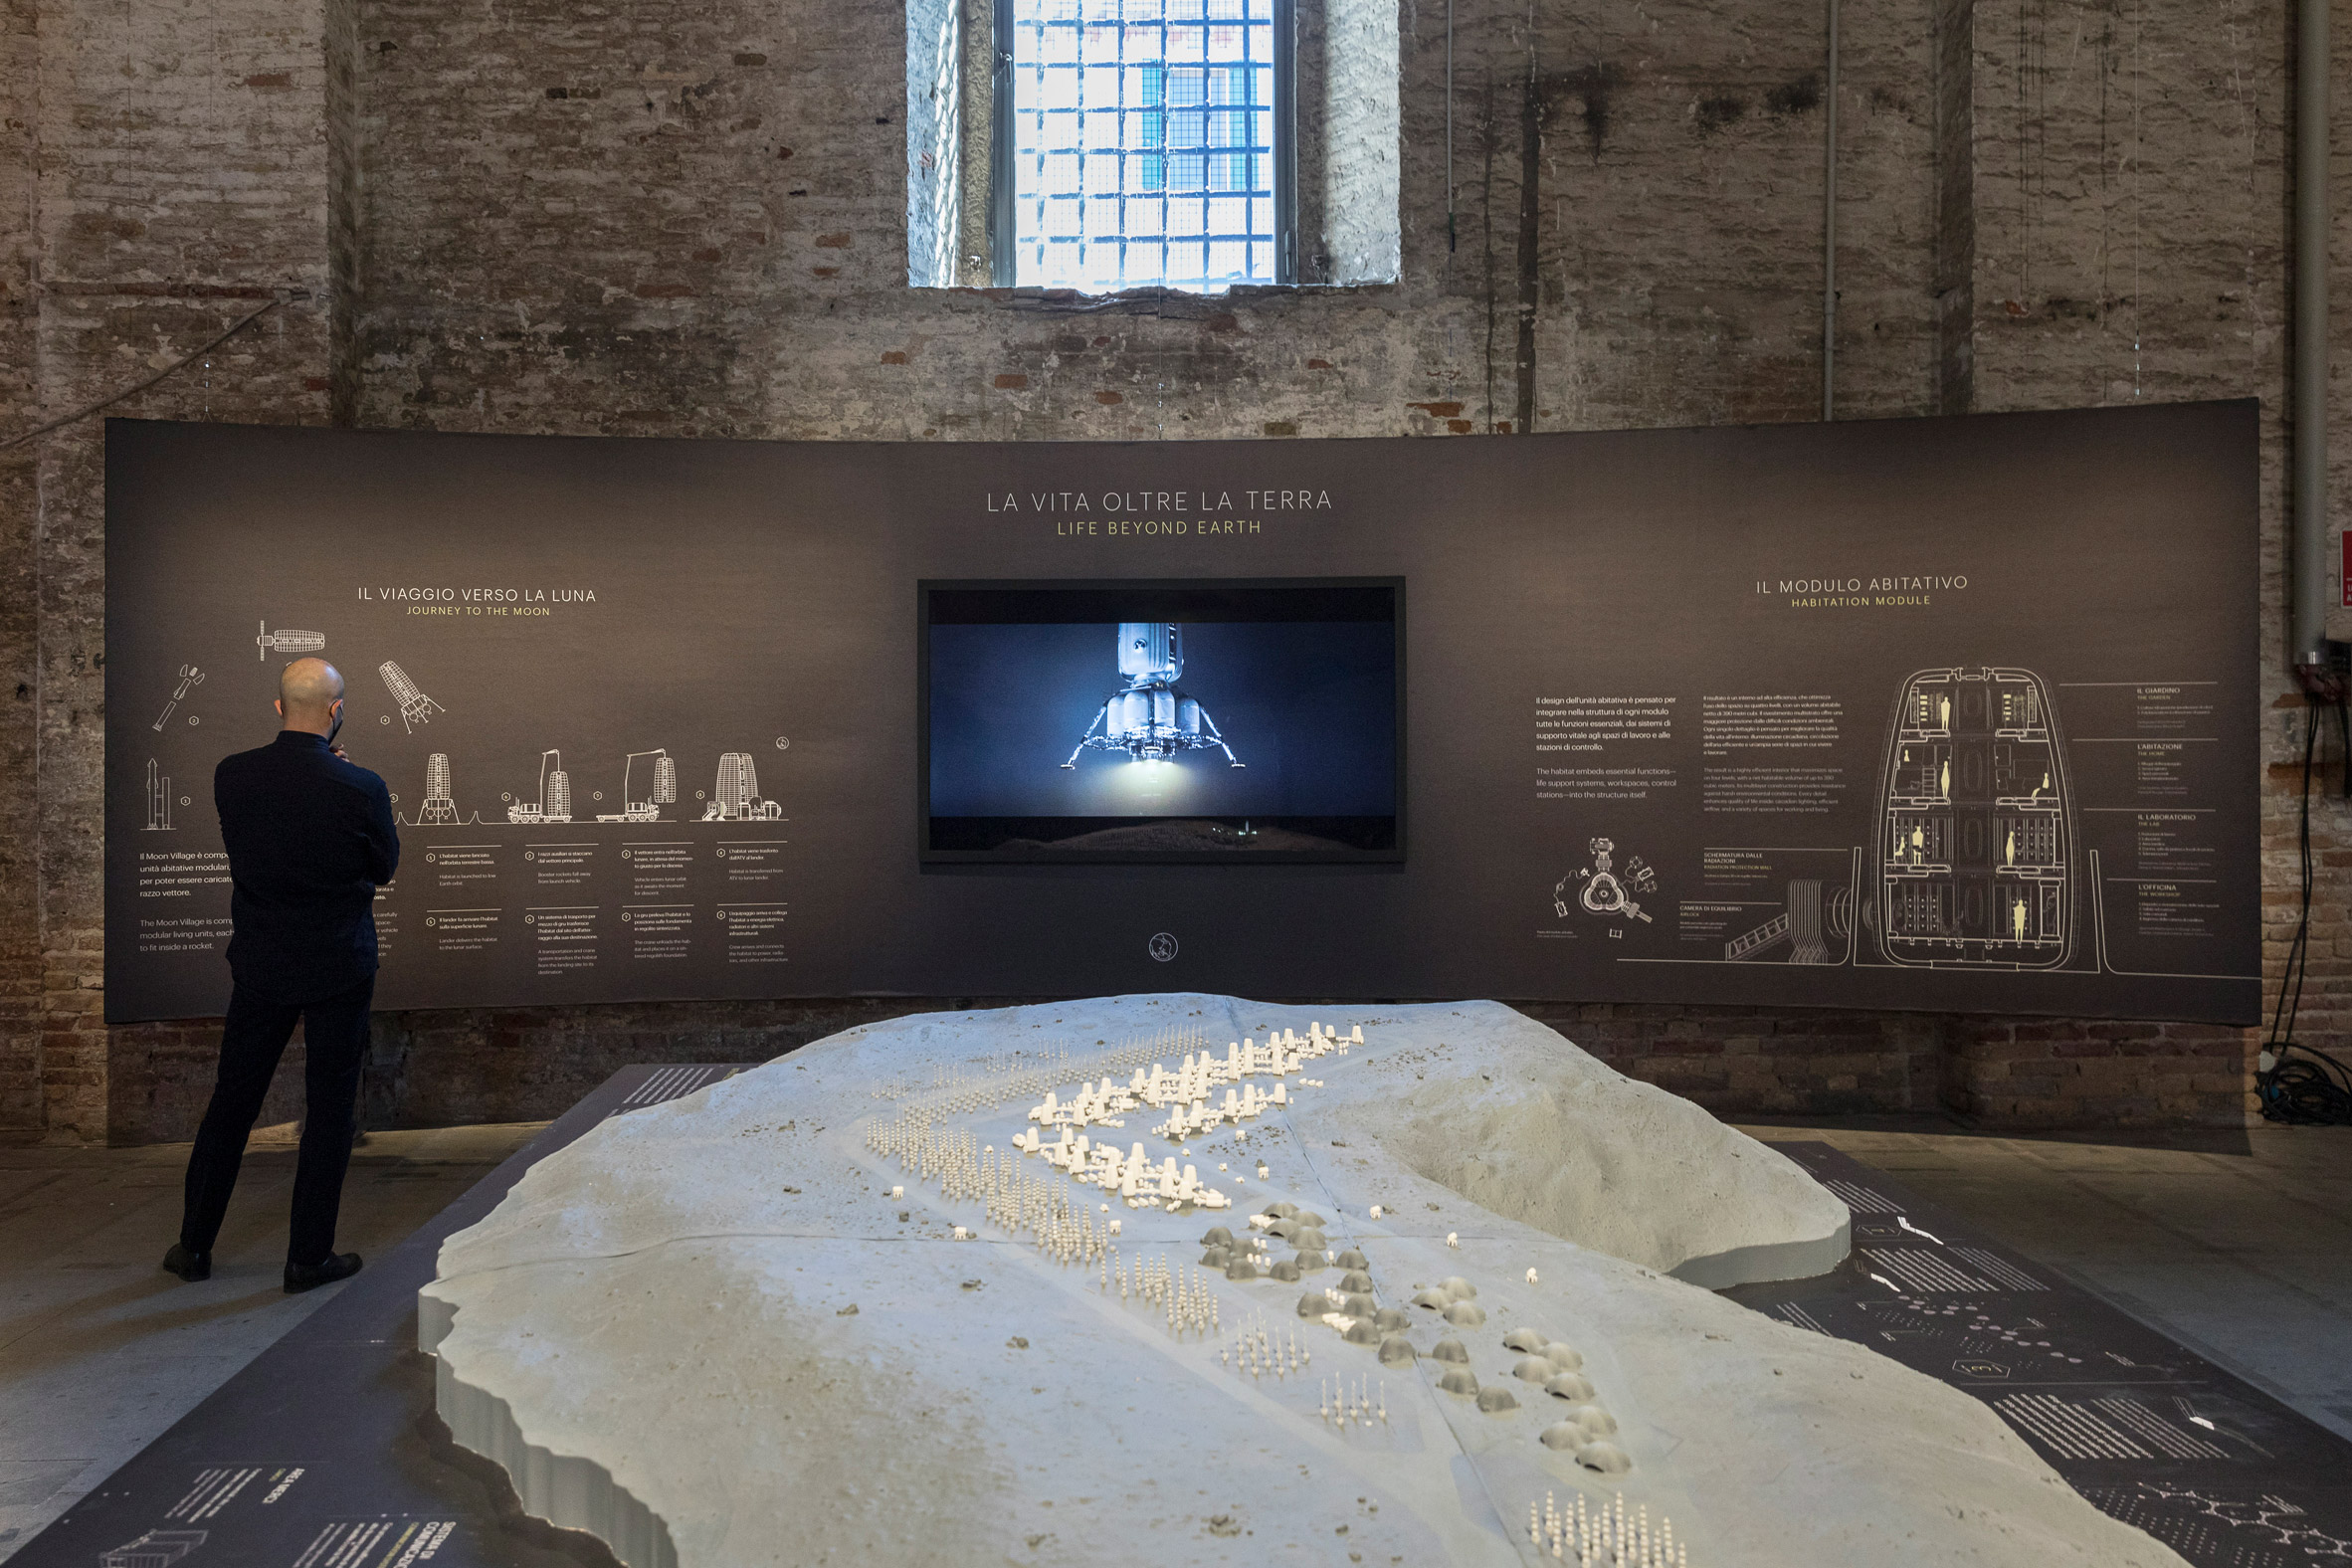 Moon Village is on show at the Venice Architecture Biennale